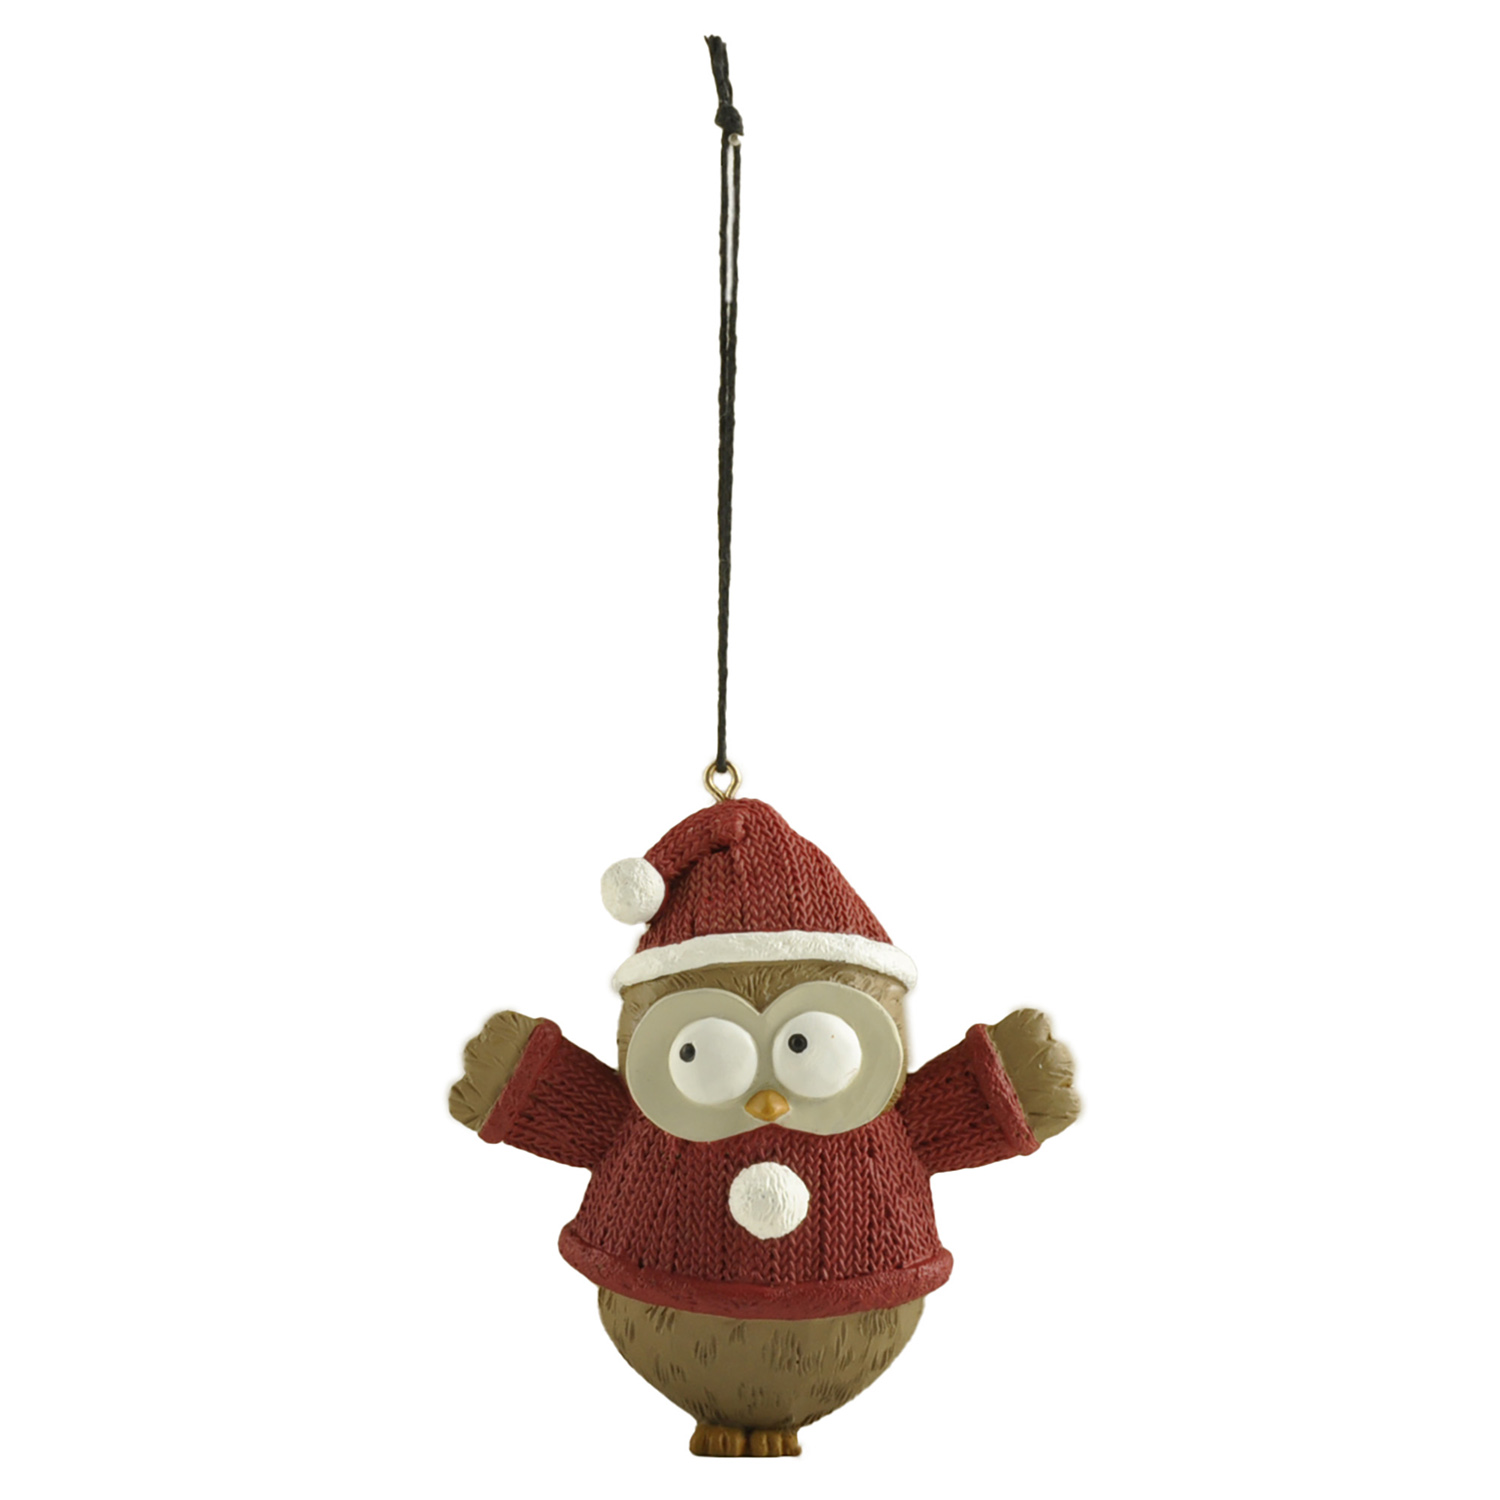 Adorable Resin Owl Christmas Ornament in Santa Outfit – Festive Hanging Decoration for Holiday Trees 238-52141